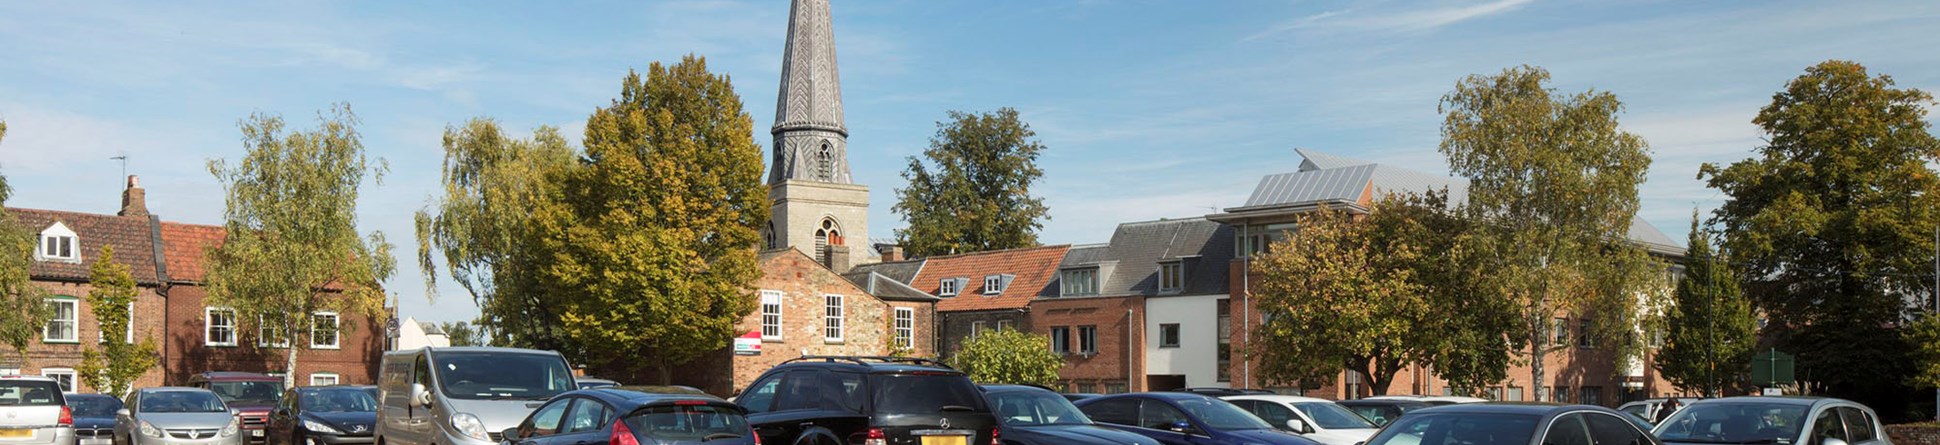 Cars parked in car park with church spire in background